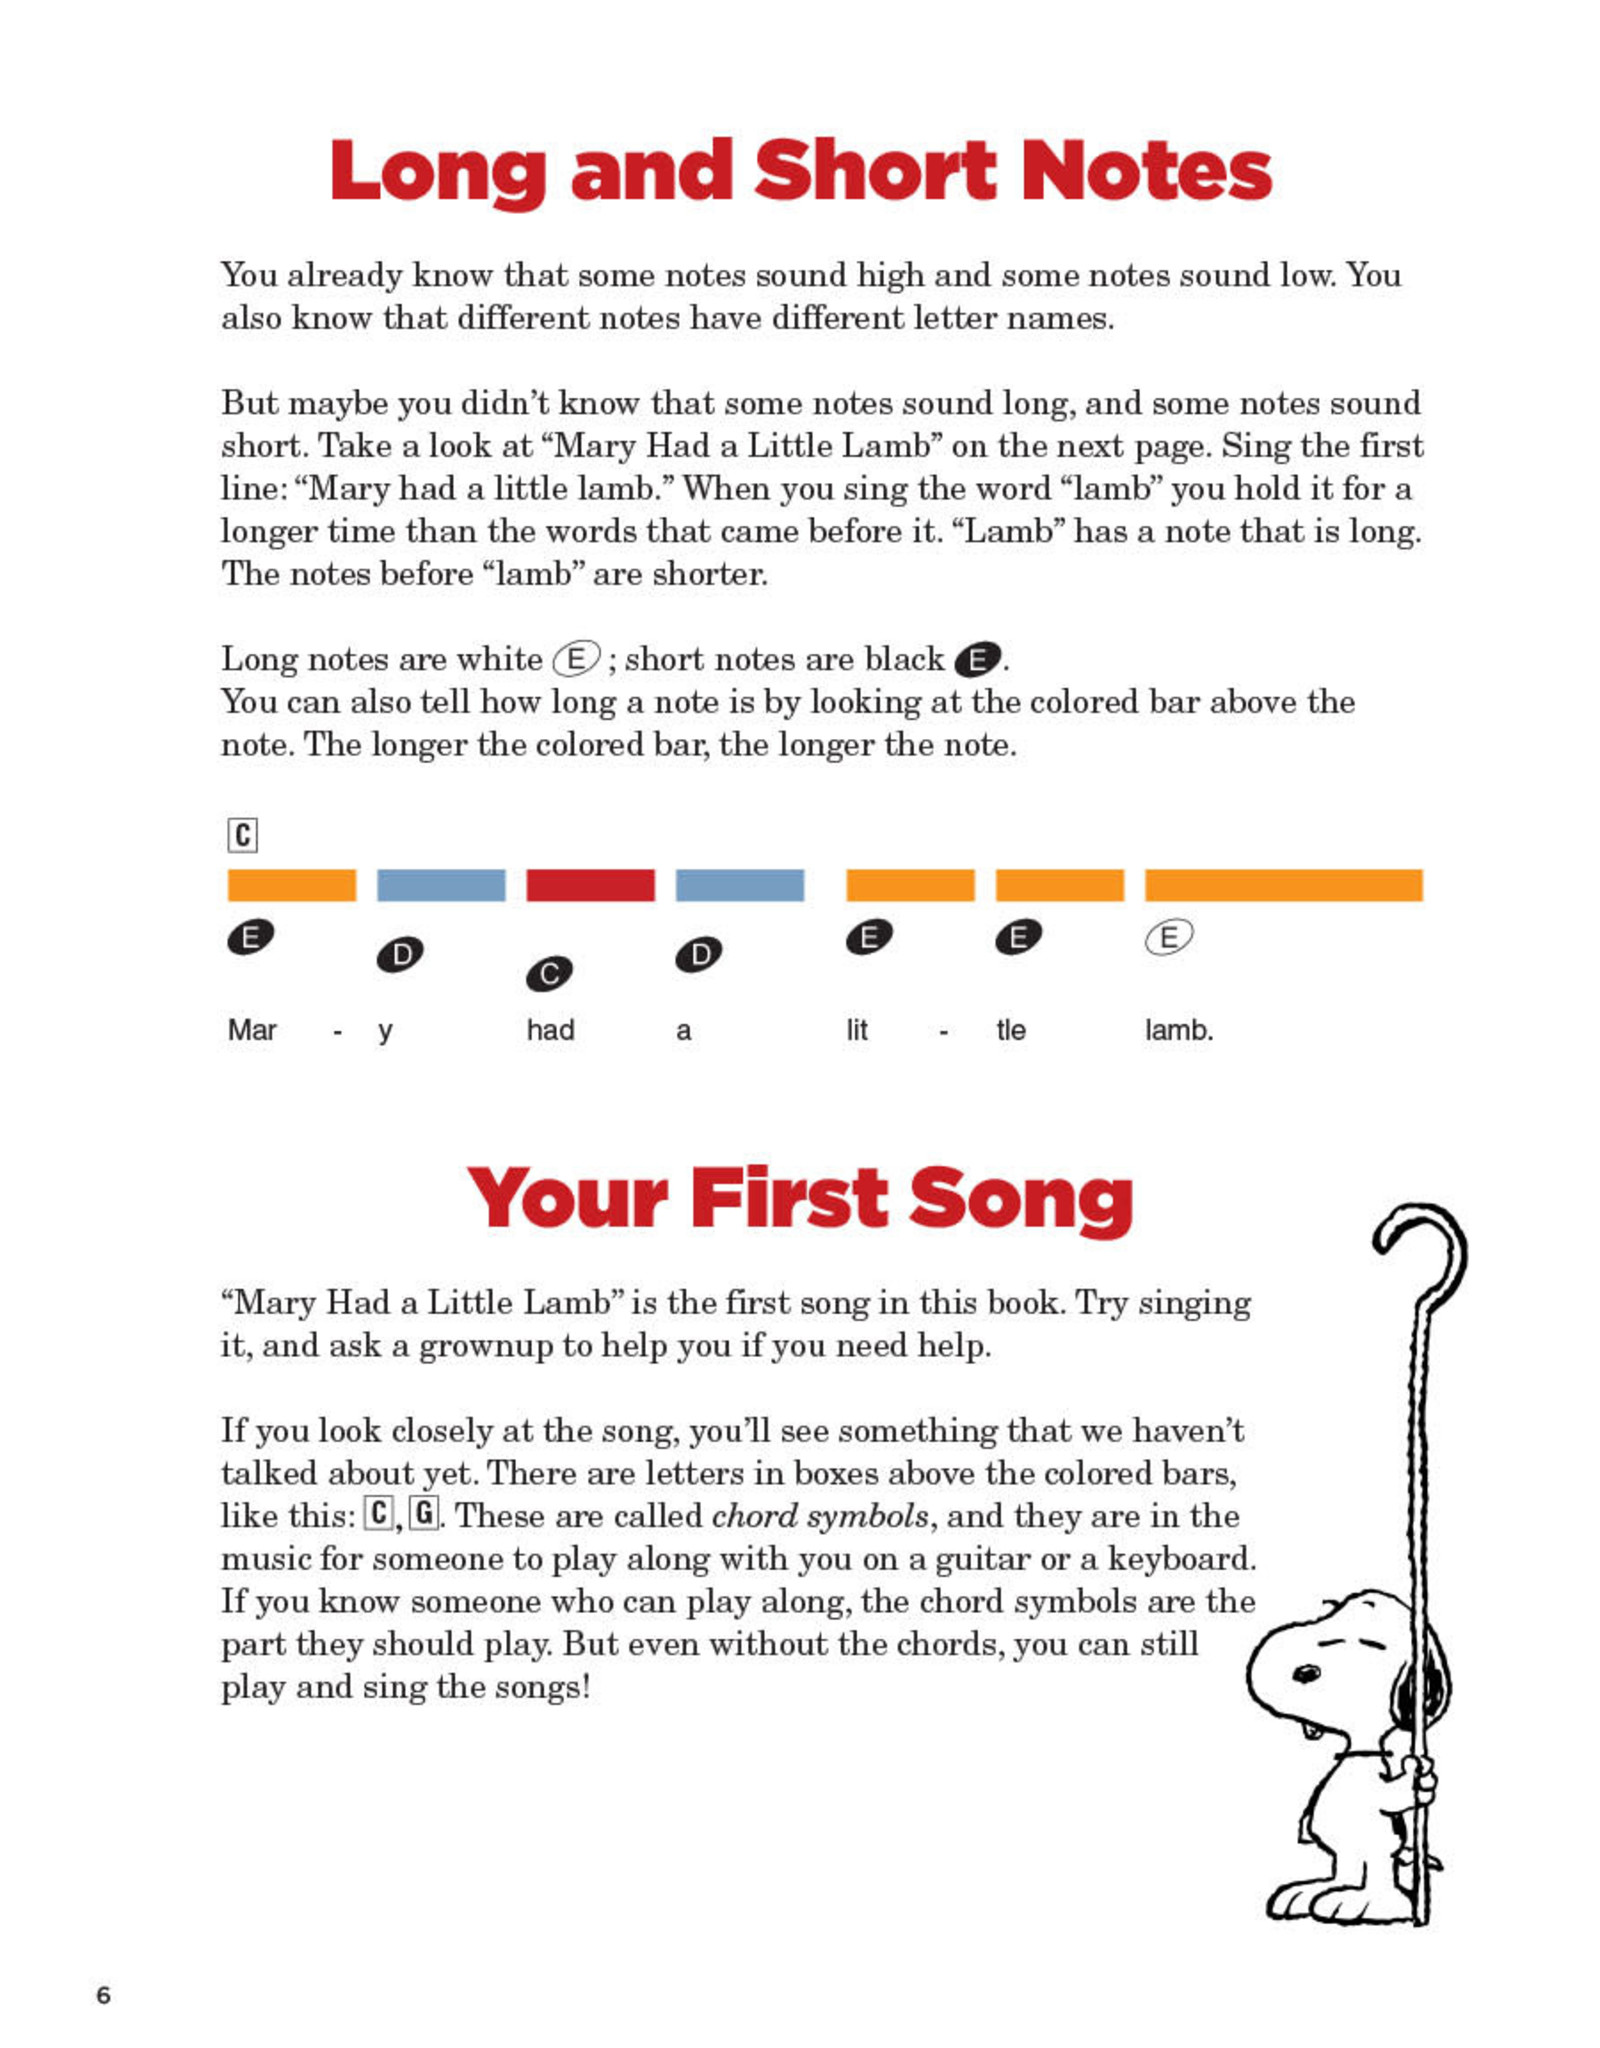 Hal Leonard Peanuts Music Activity Book: An Introduction to Music